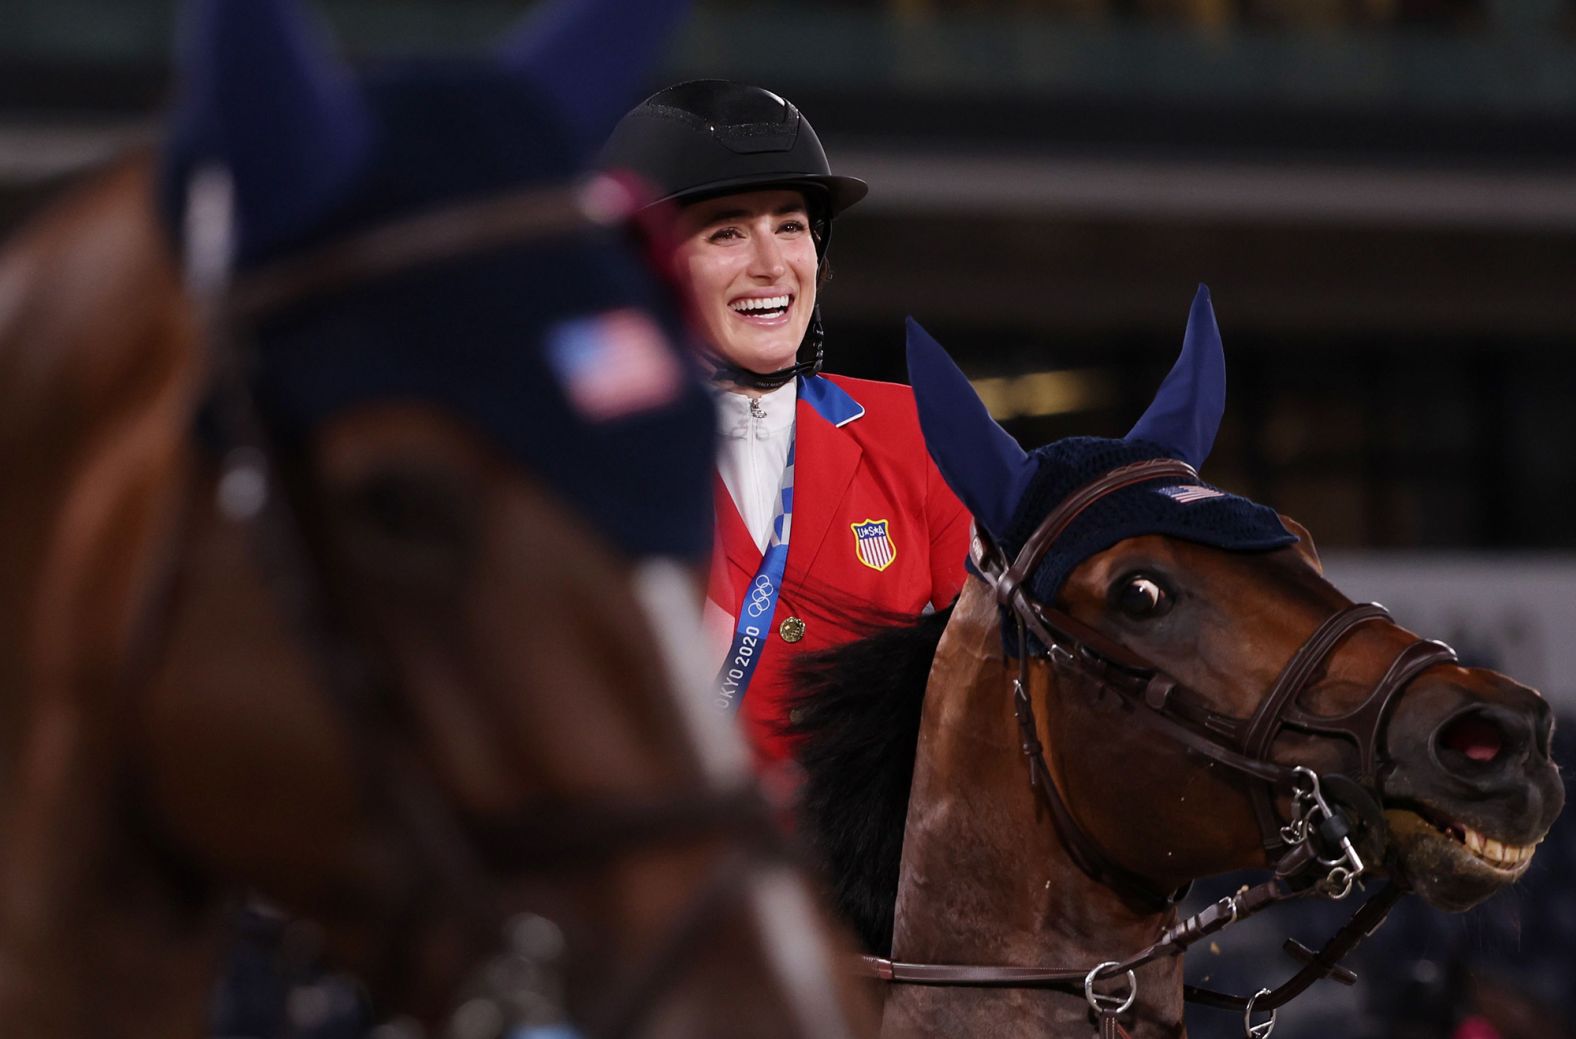 Jessica Springsteen, the daughter of rock star Bruce Springsteen, was part of the US equestrian team <a href="index.php?page=&url=https%3A%2F%2Fwww.cnn.com%2F2021%2F08%2F07%2Fsport%2Fjessica-springsteen-silver-tokyo-intl-spt%2Findex.html" target="_blank">that won silver in jumping</a> on August 7.